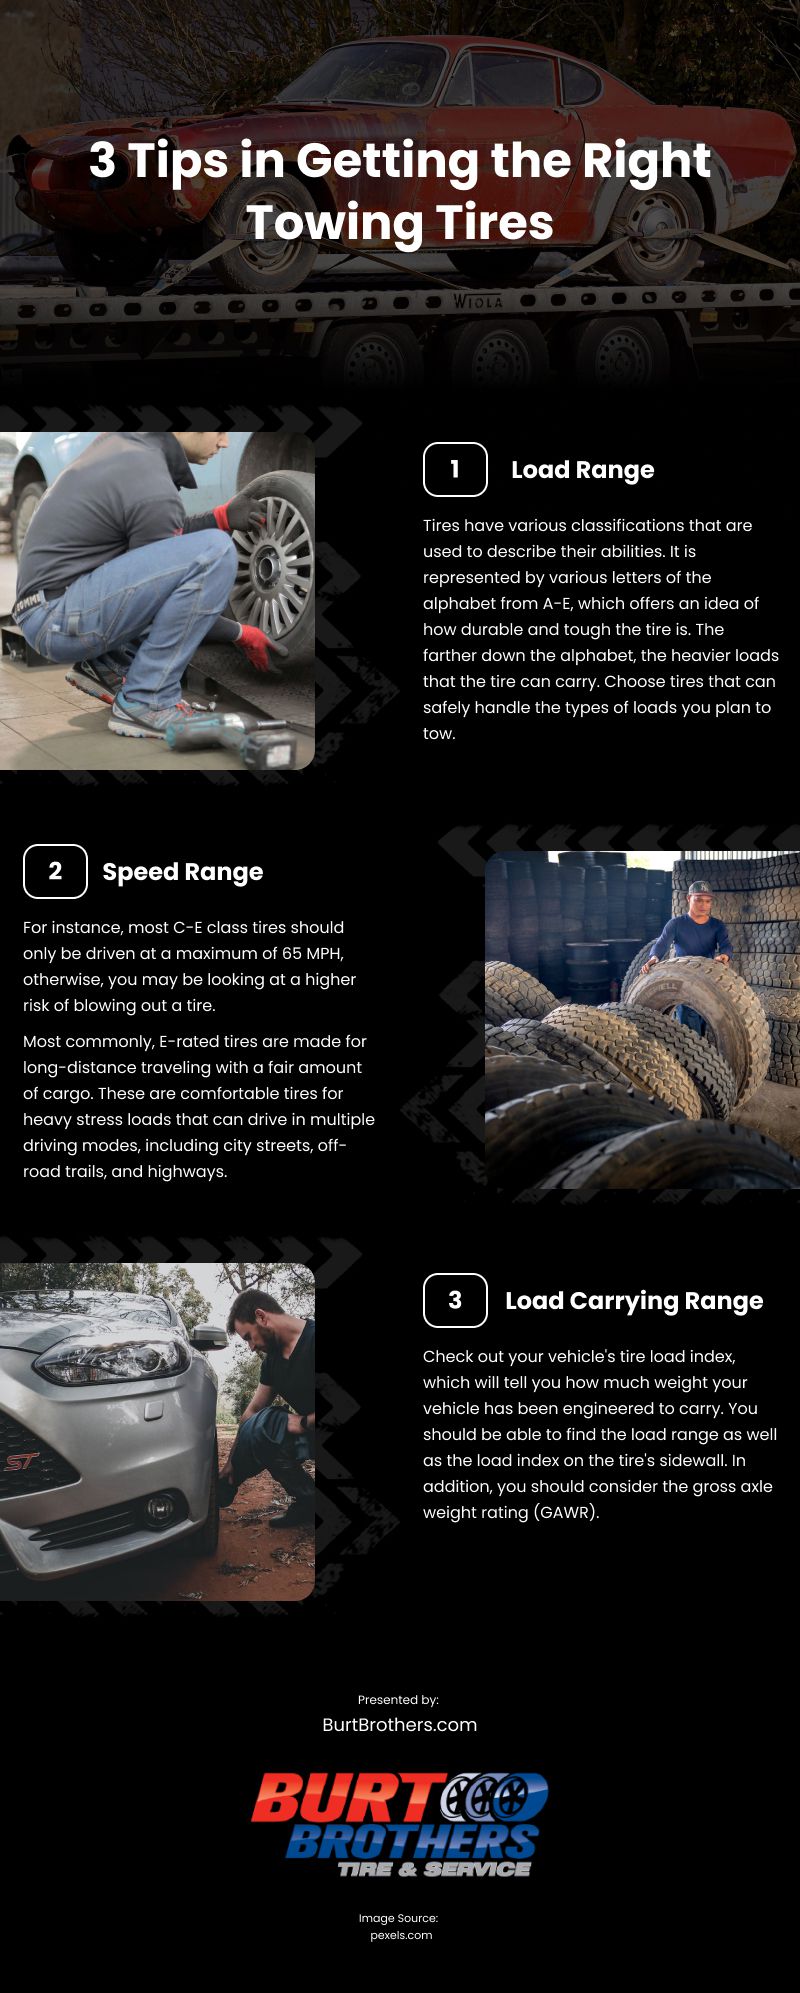 3 Tips in Getting the Right Towing Tires Infographic